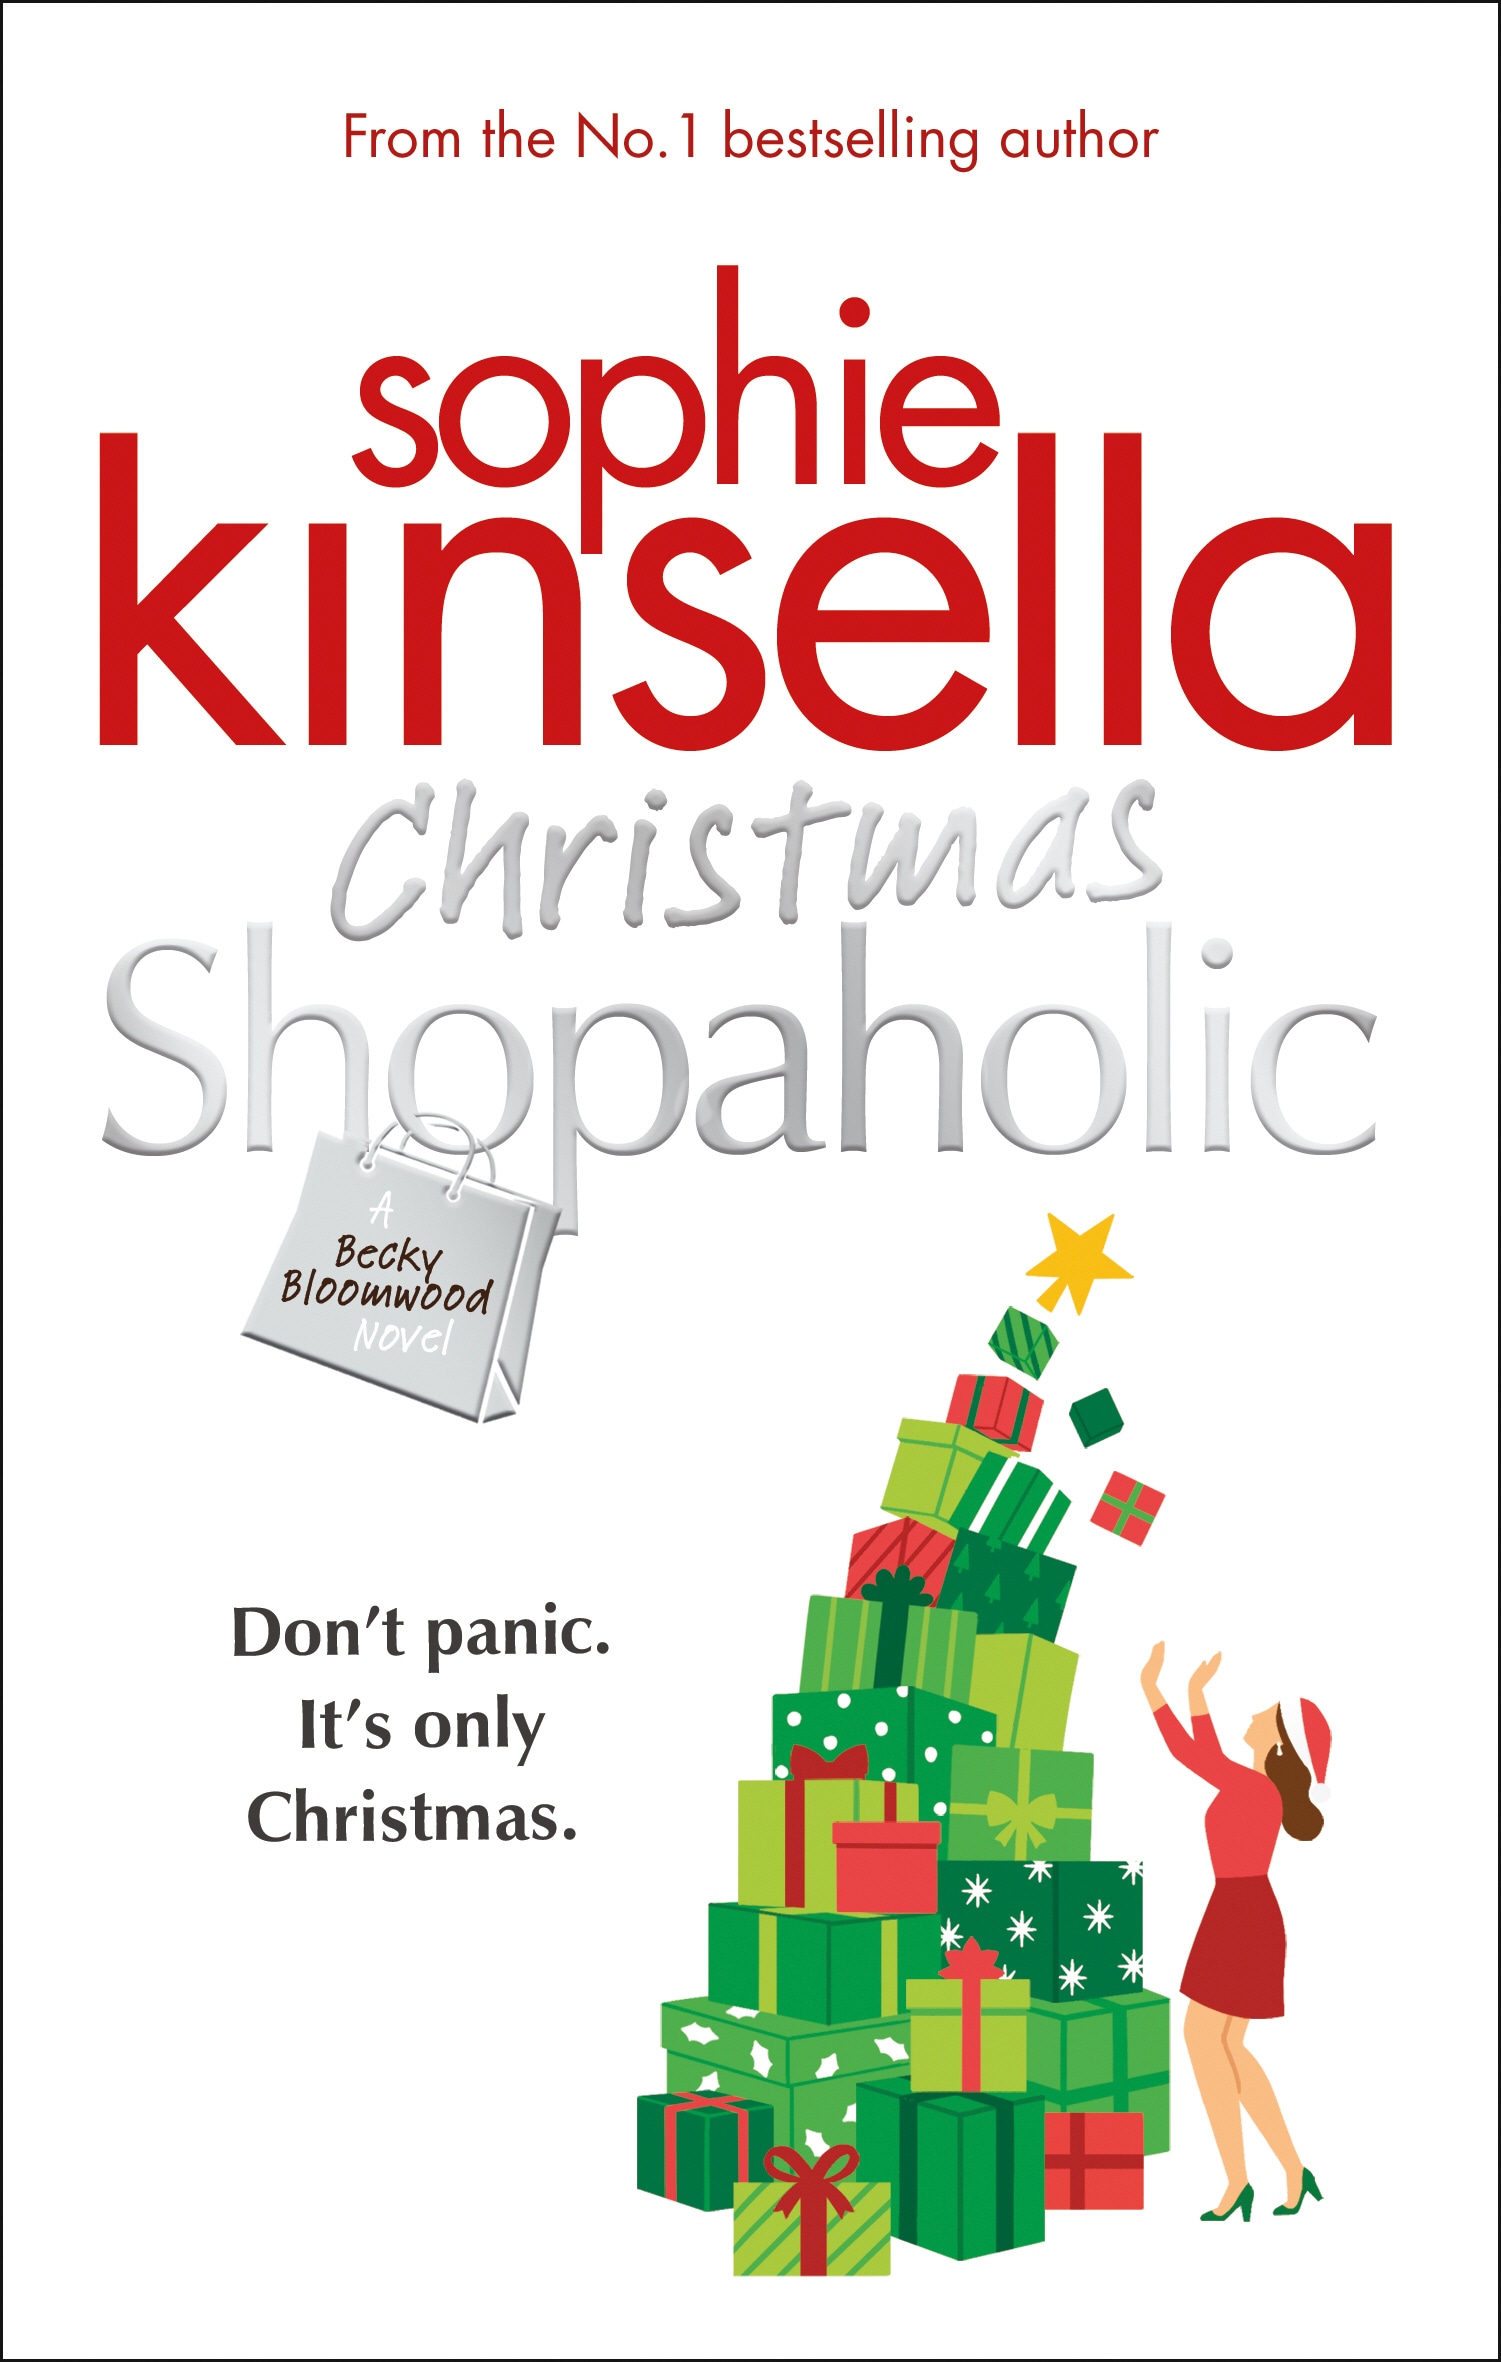 Book “Christmas Shopaholic” by Sophie Kinsella — October 1, 2020